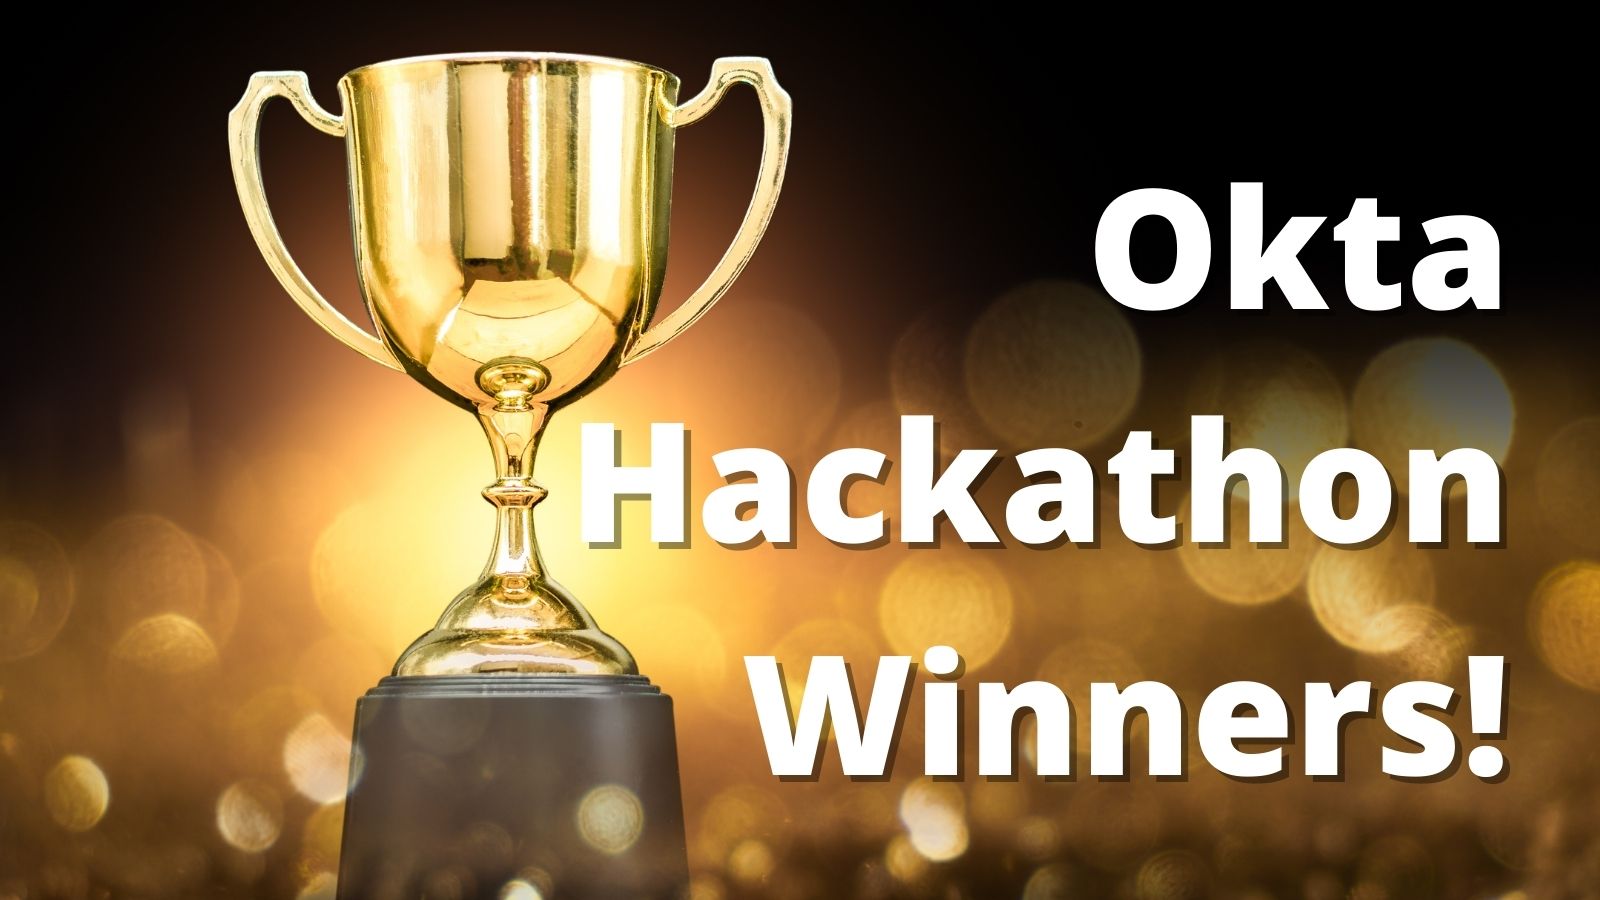 Announcing the Okta Identity Early Access Hackathon Winners